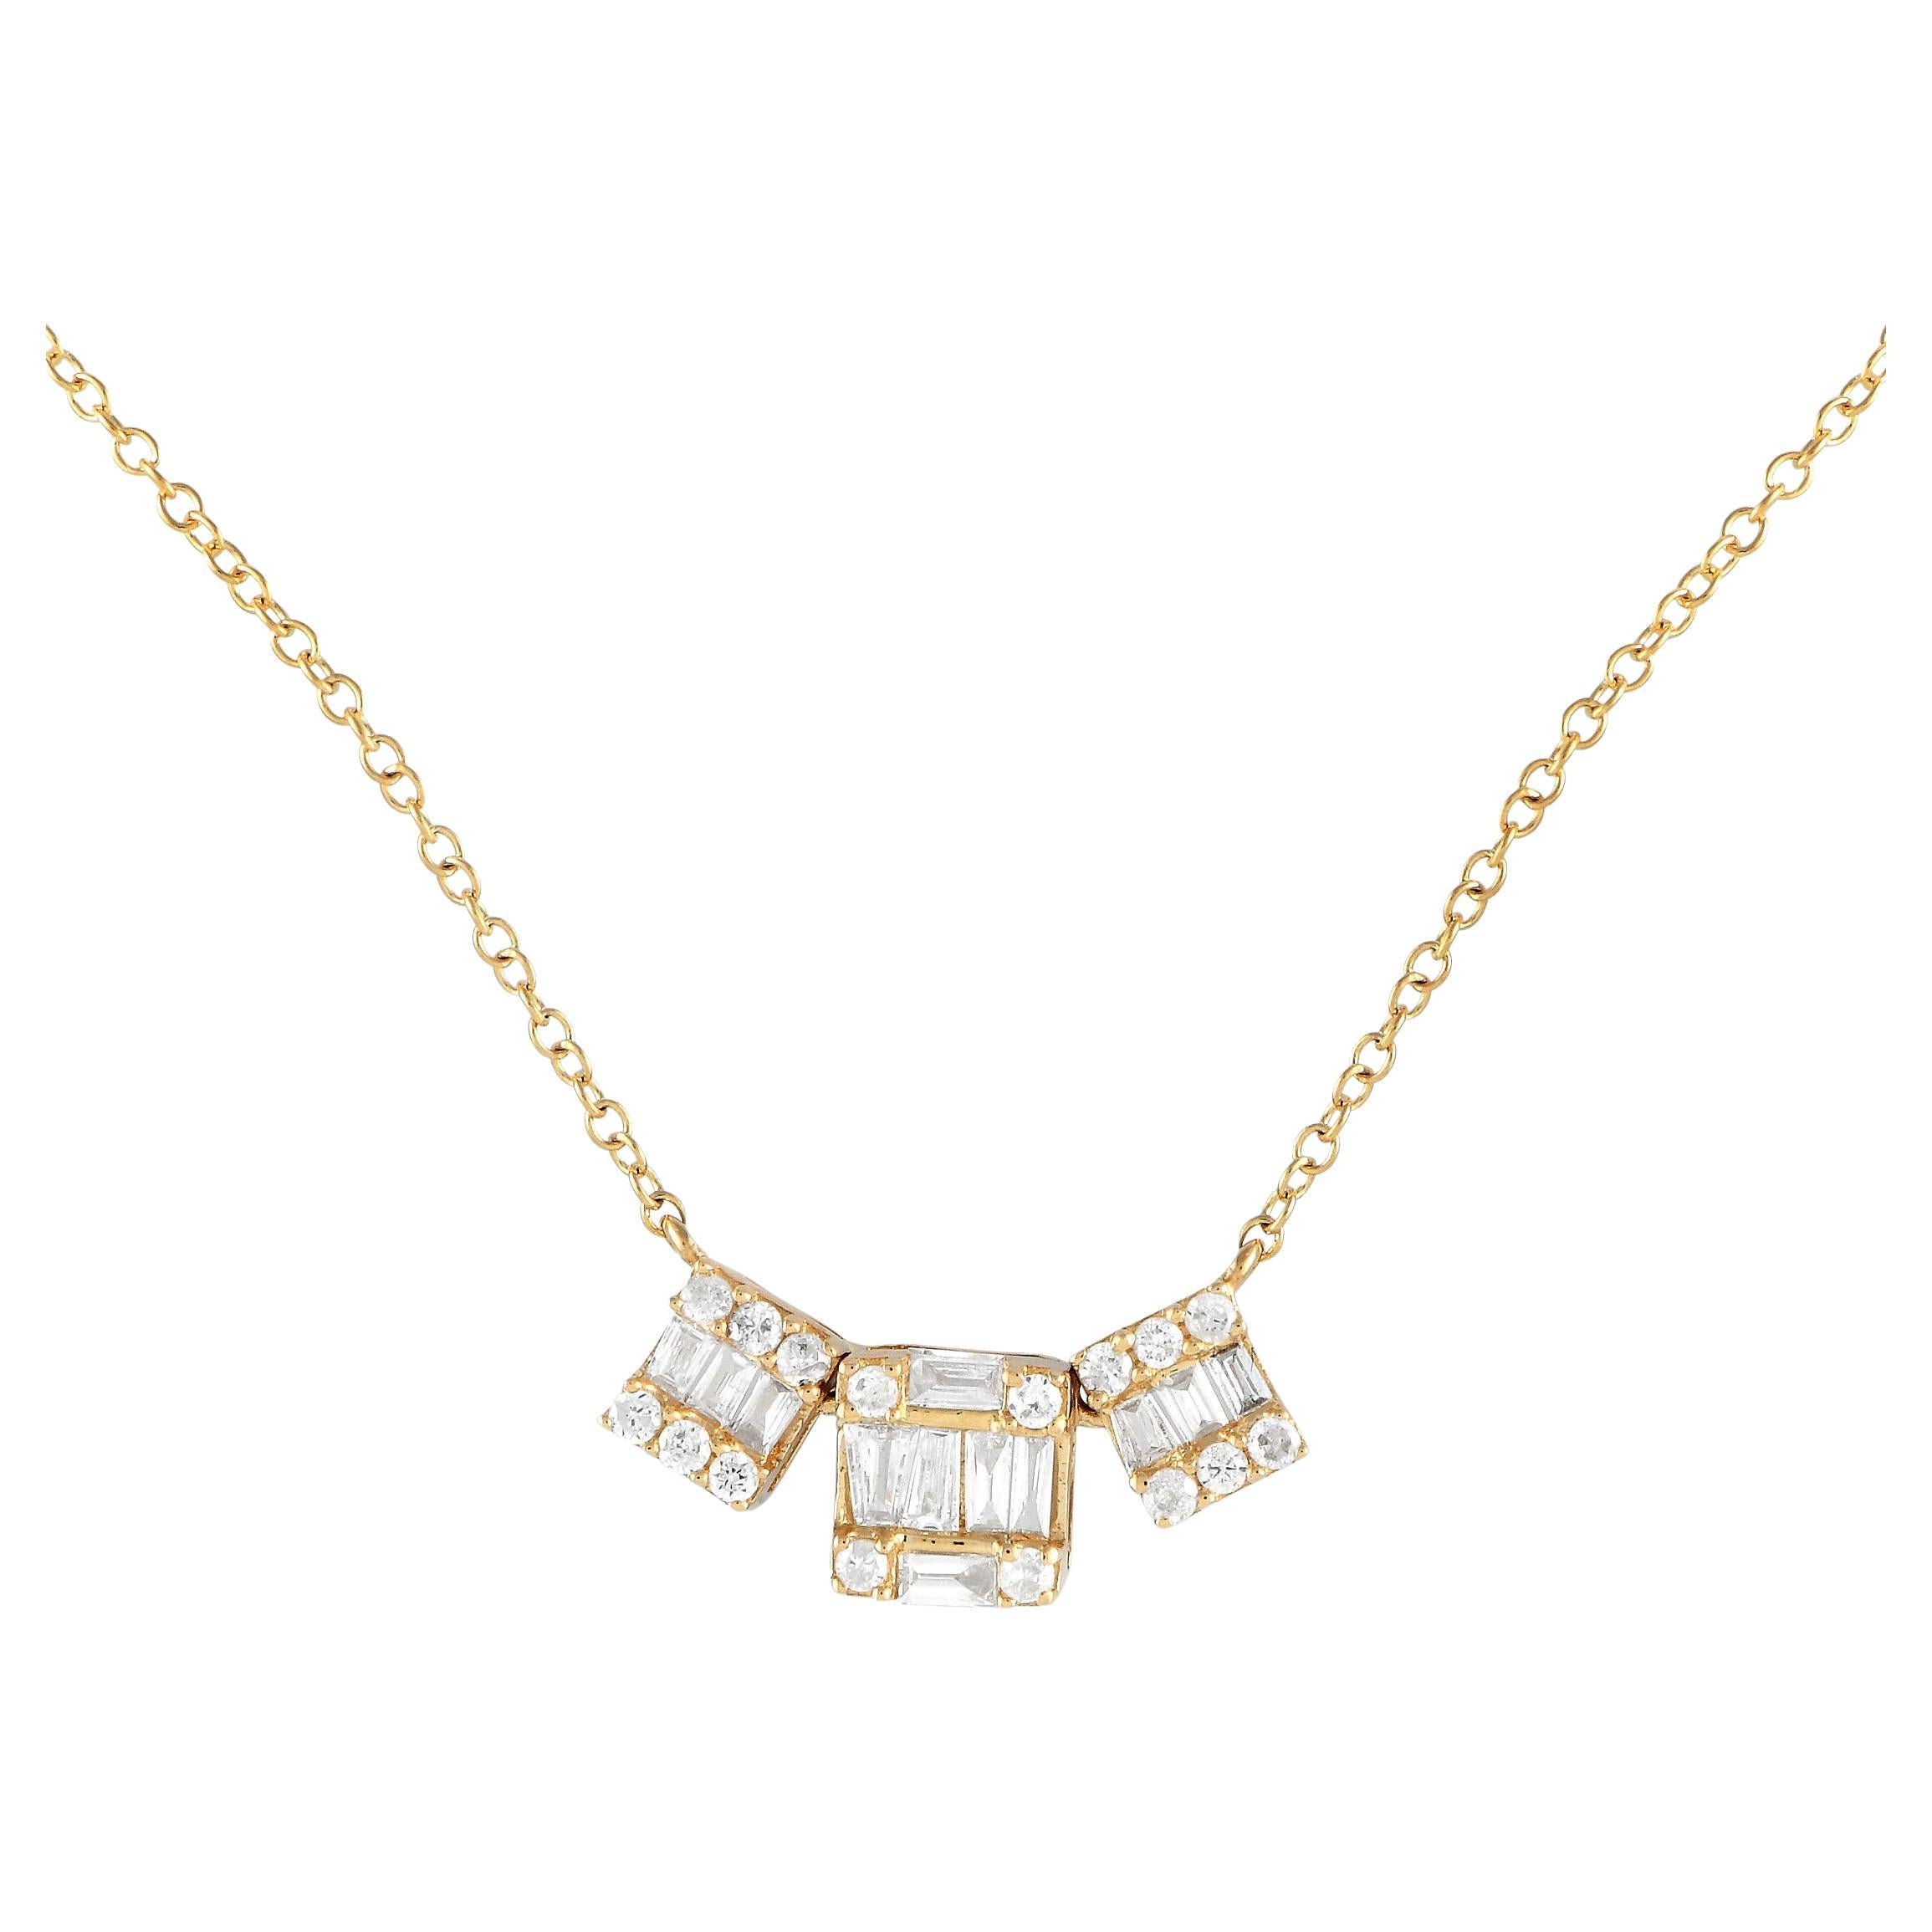 LB Exclusive 14K Yellow Gold 0.20ct Diamond Cluster Necklace PN14844 For Sale